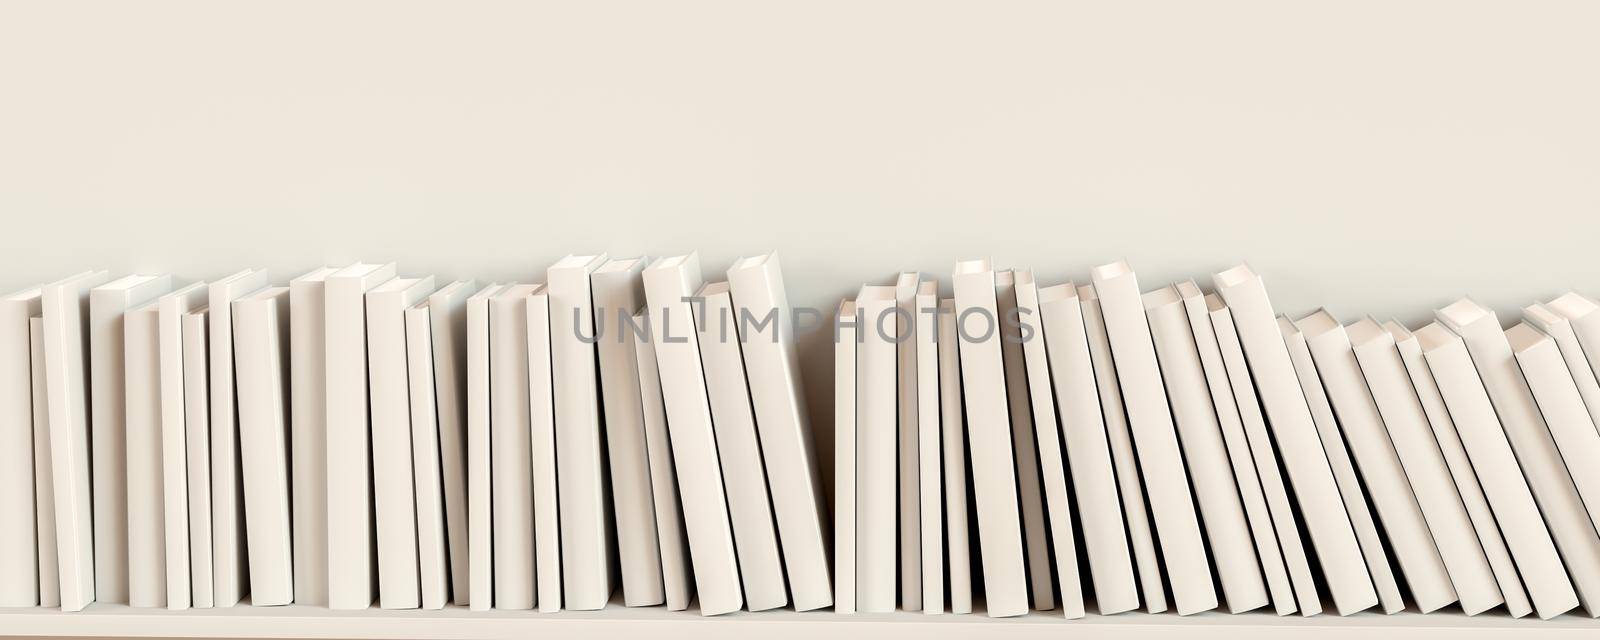 The books are stacked in a row on a white background. 3D rendering illustration. by Valentyn